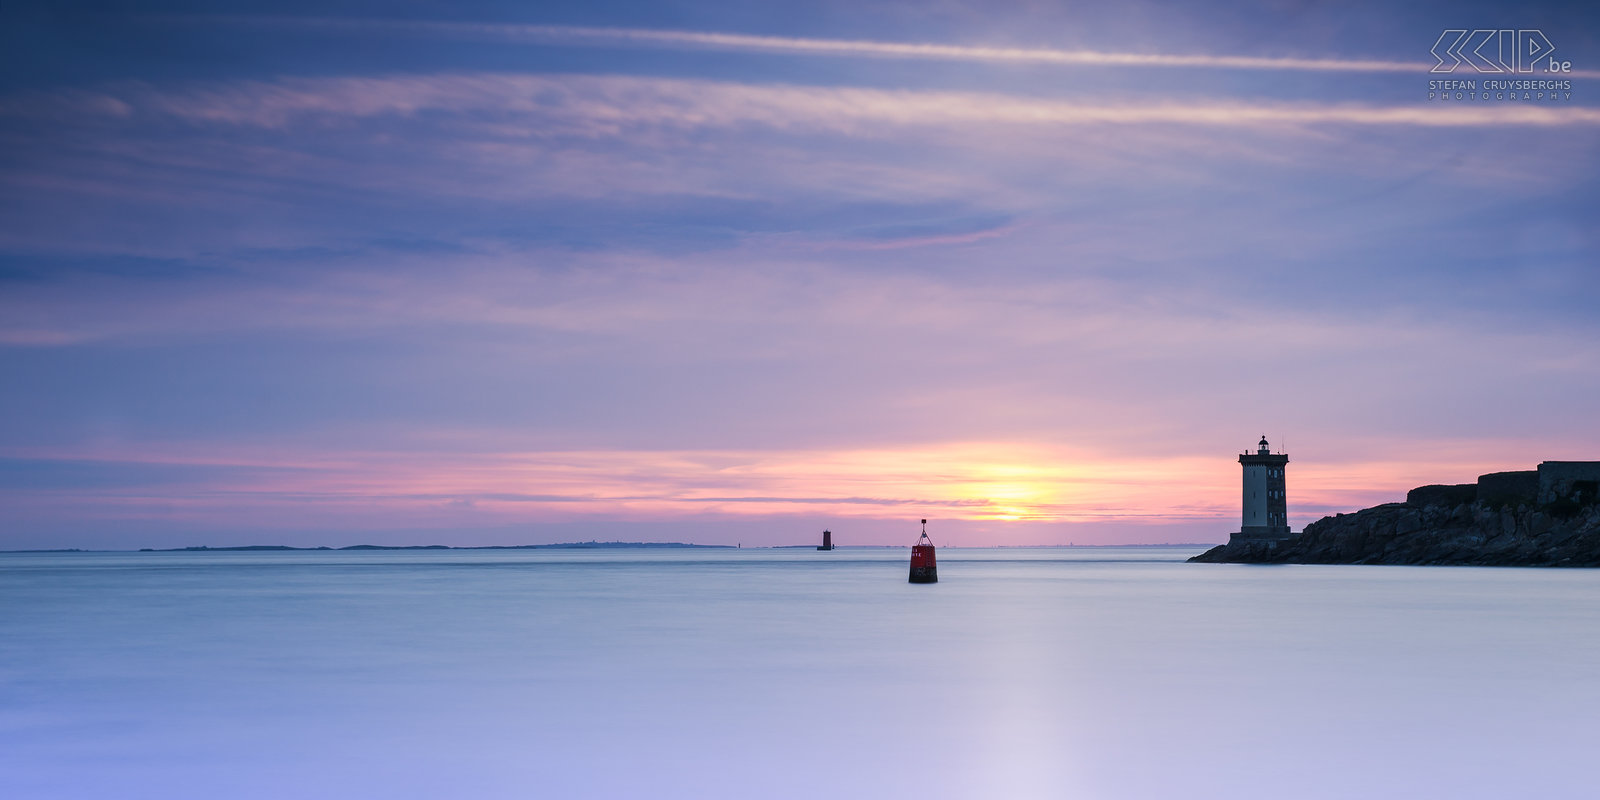 Le Conquet - Sunset phare de Kermorvan Sunset with in the background the lighthouse of Kermorvan. Stefan Cruysberghs